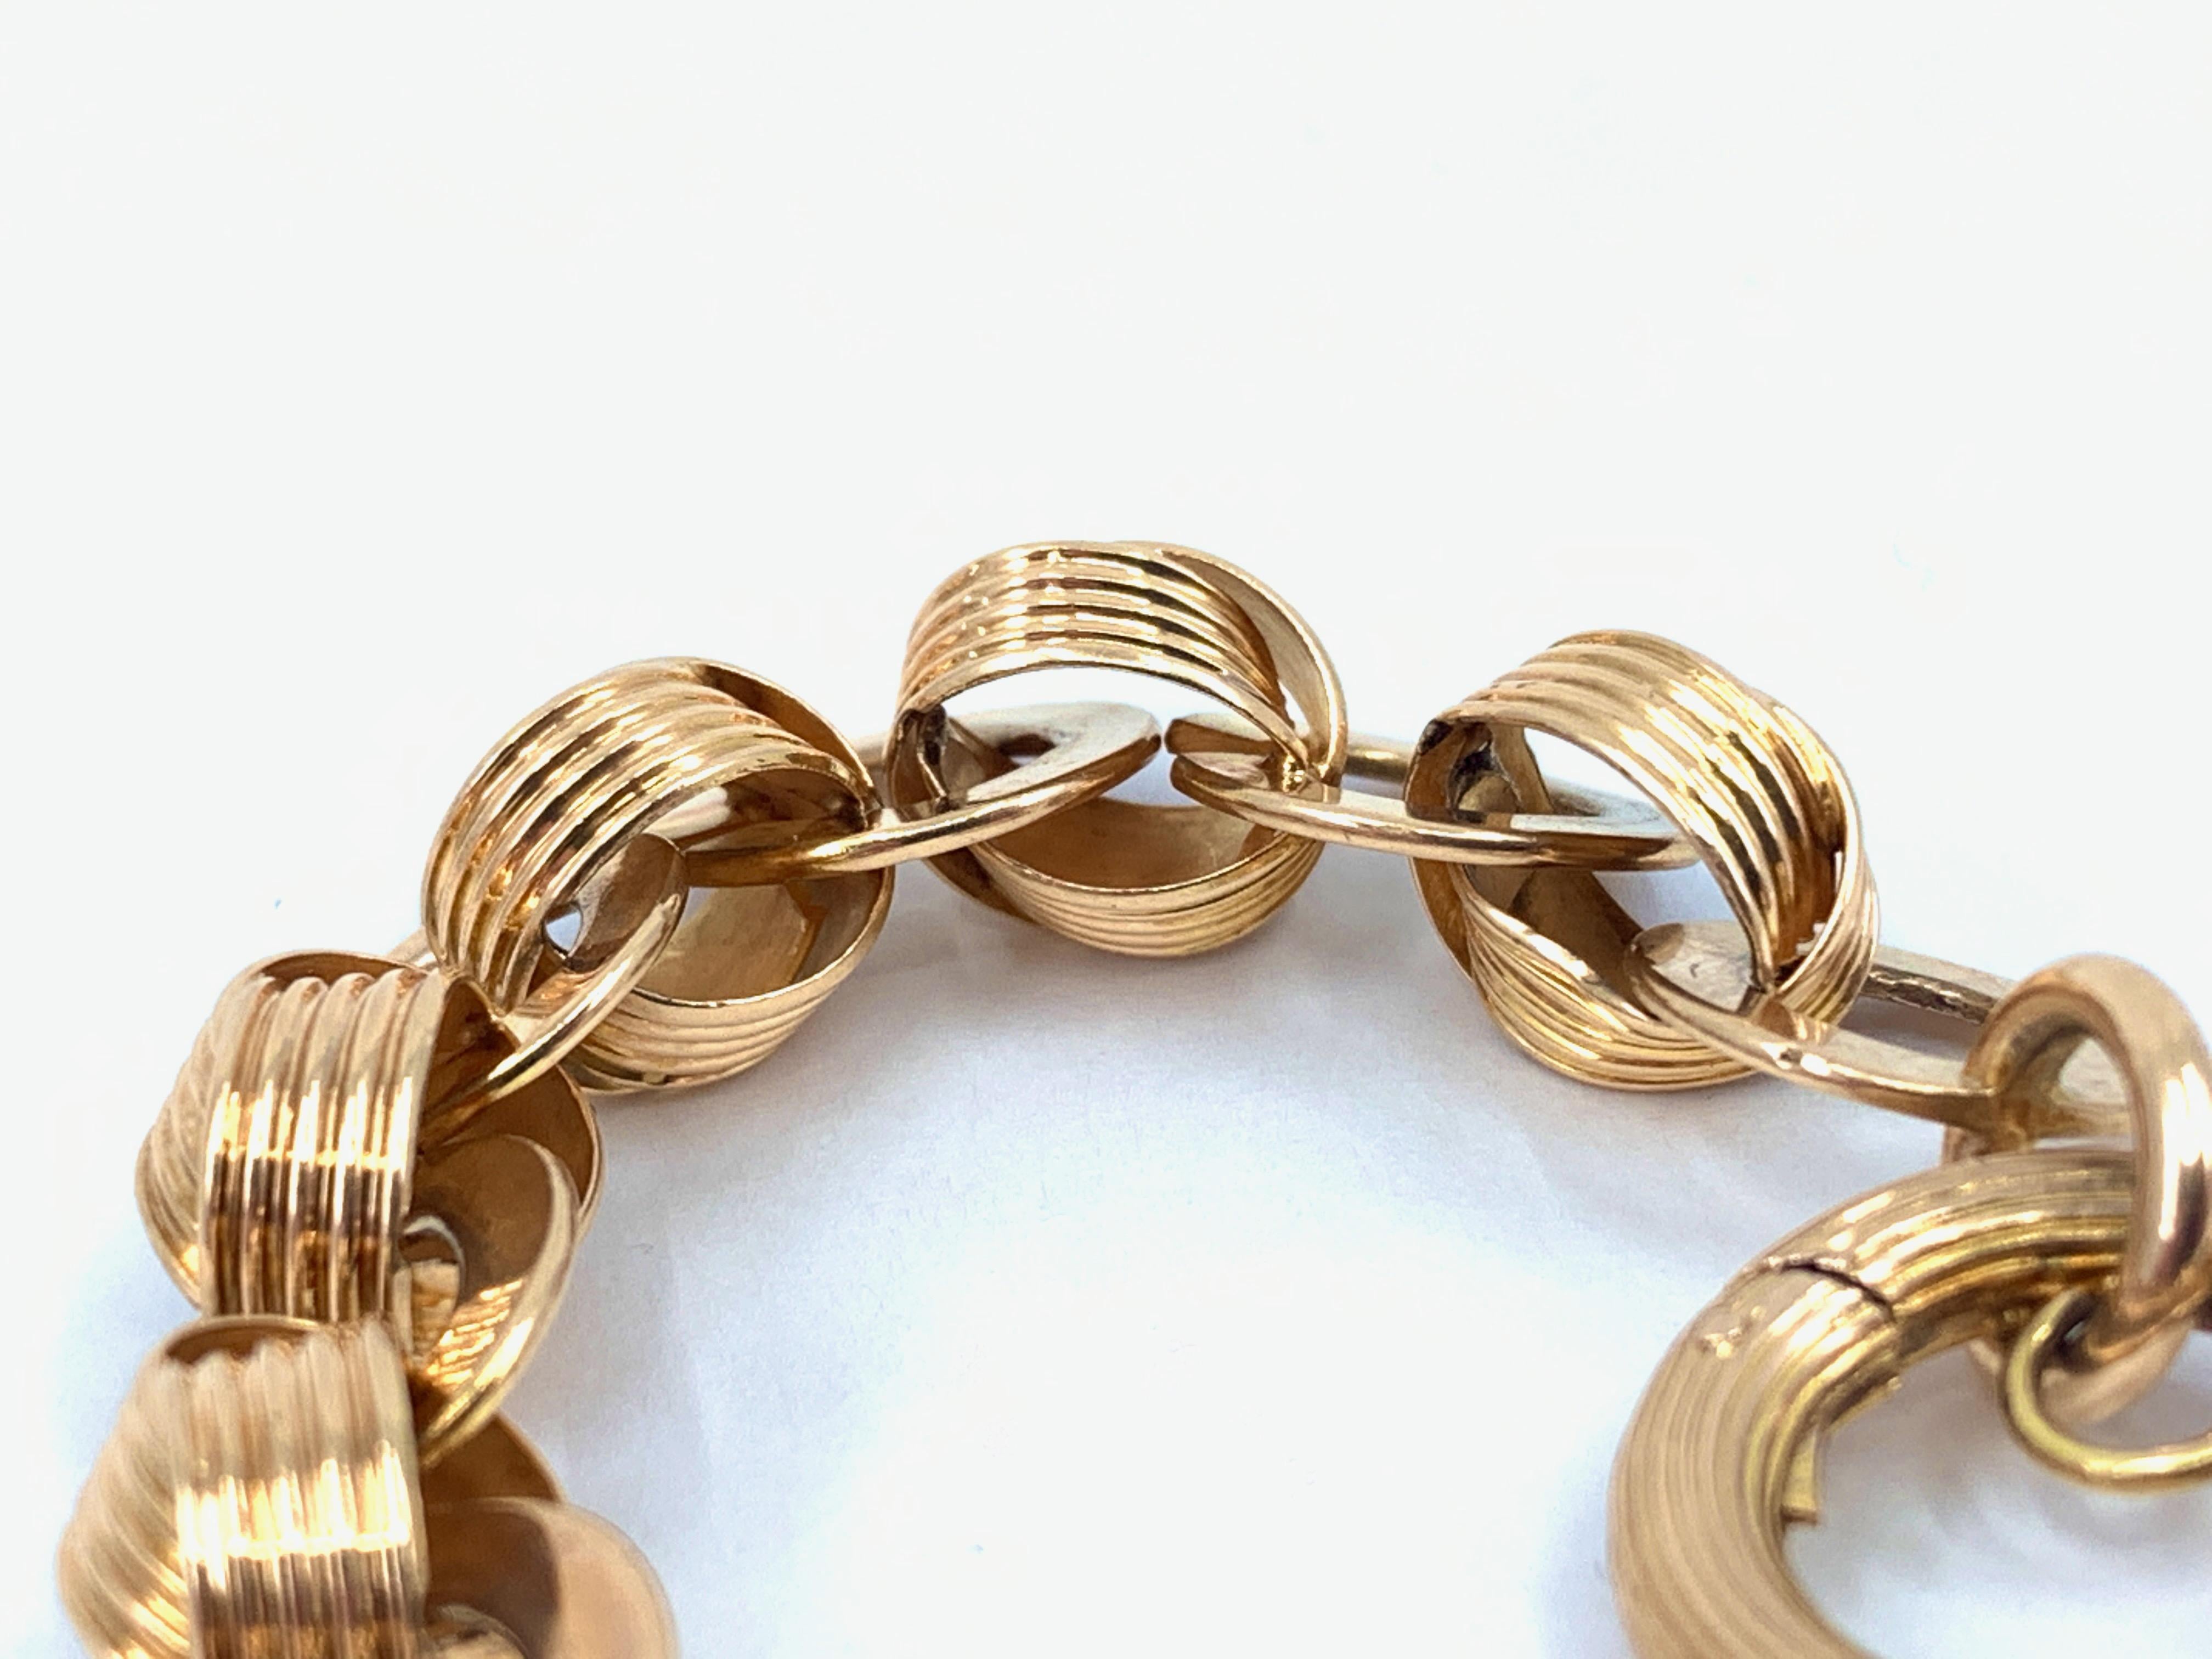 Women's or Men's Ring & Connector Chain in 18 Karat Gold with Detachable Extender Fob, circa 1920